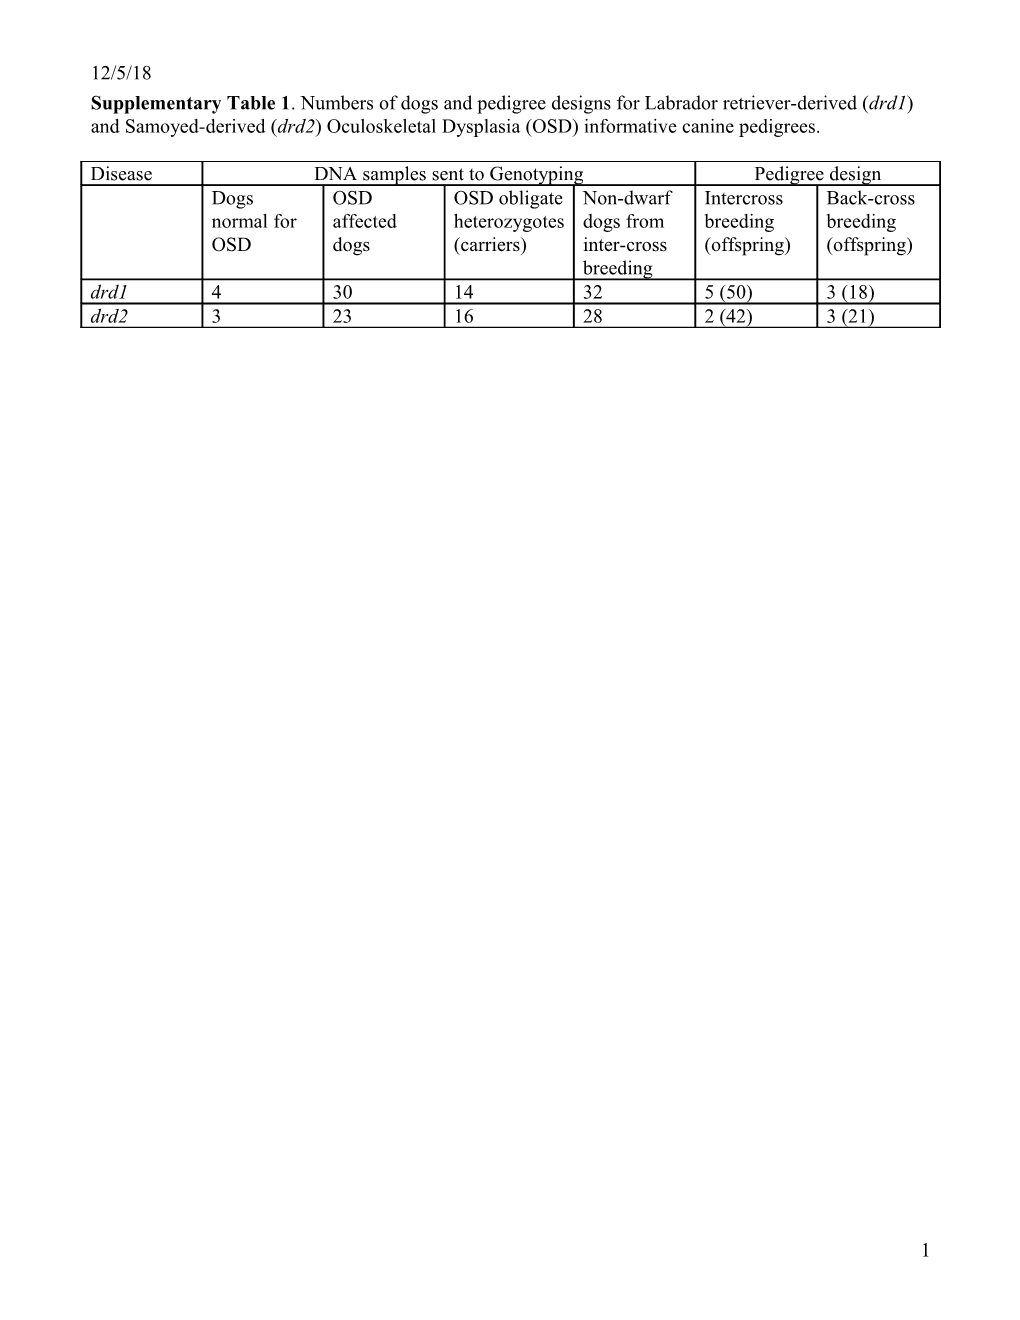 Supplementary Table 1 . Numbers of Dogs and Pedigree Designs for Labrador Retriever-Derived